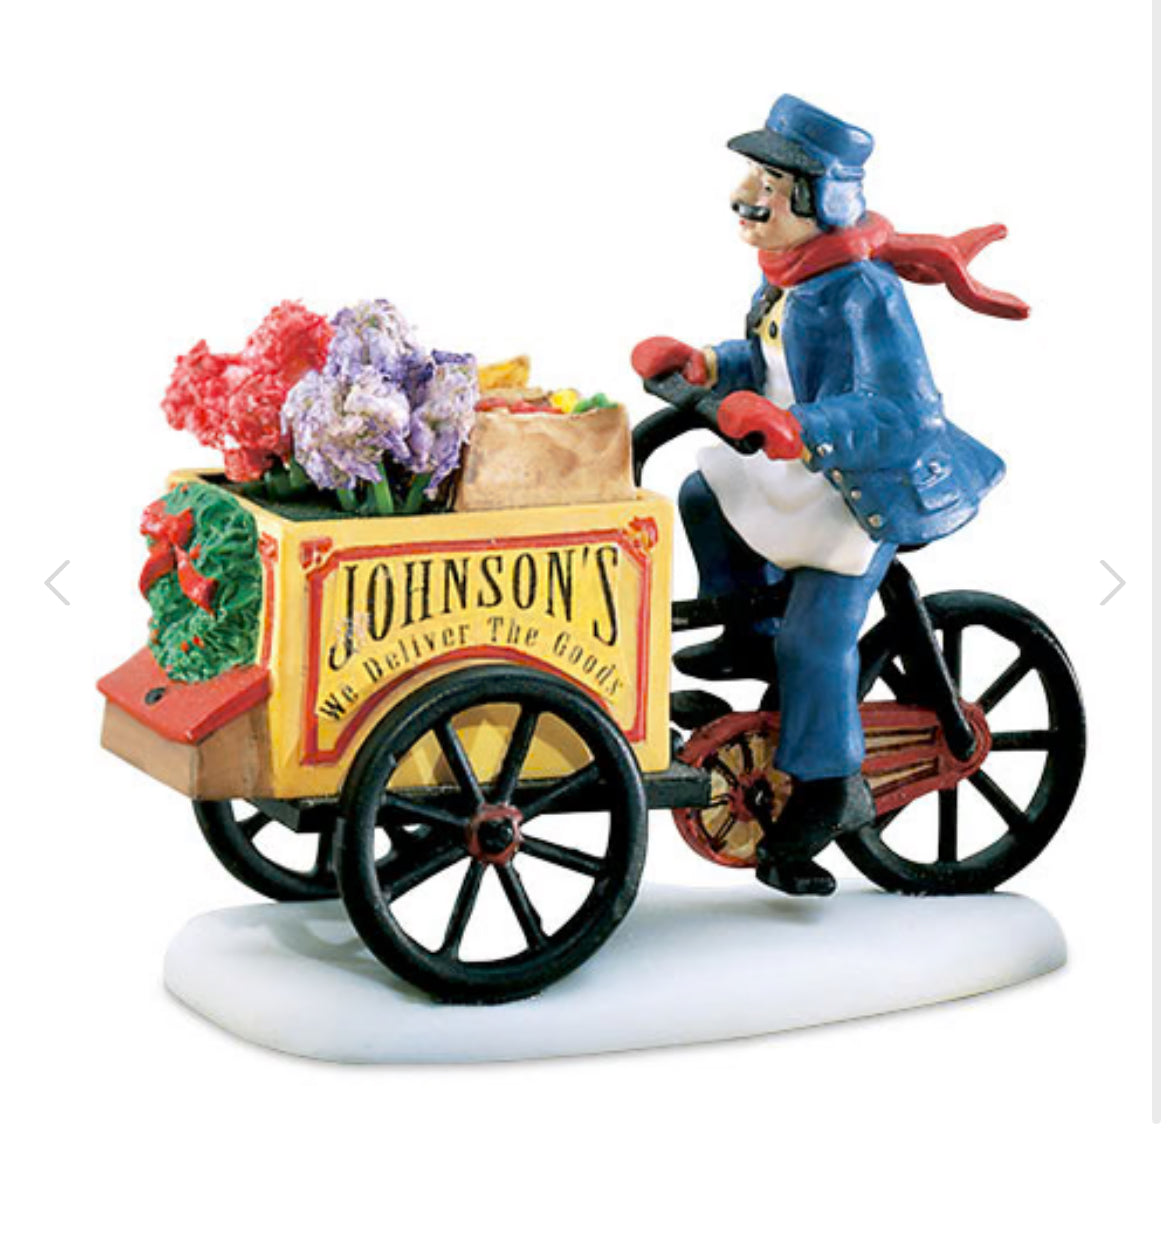 Department 56 - Heritage Village - Johnson's Grocery...Holiday Deliveries